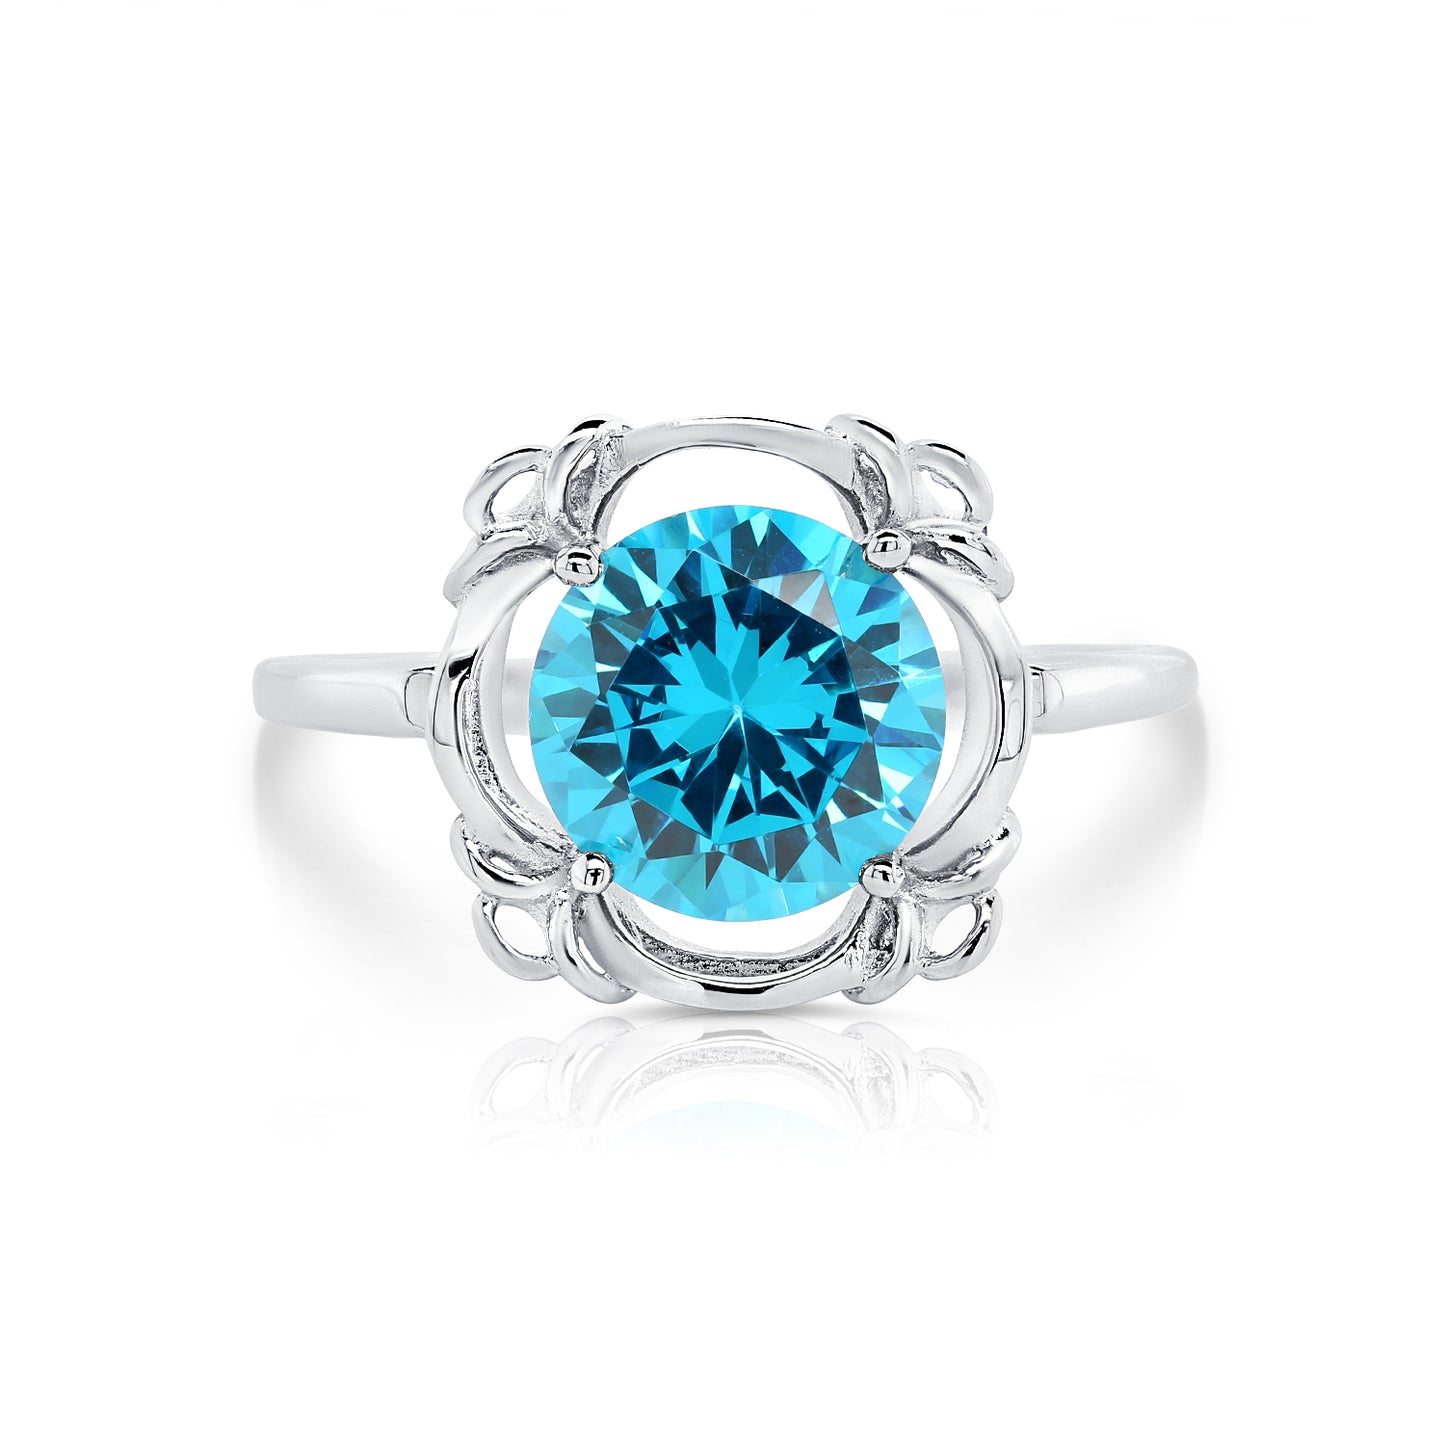 Sterling Silver Birthstone Ring, 4 colors